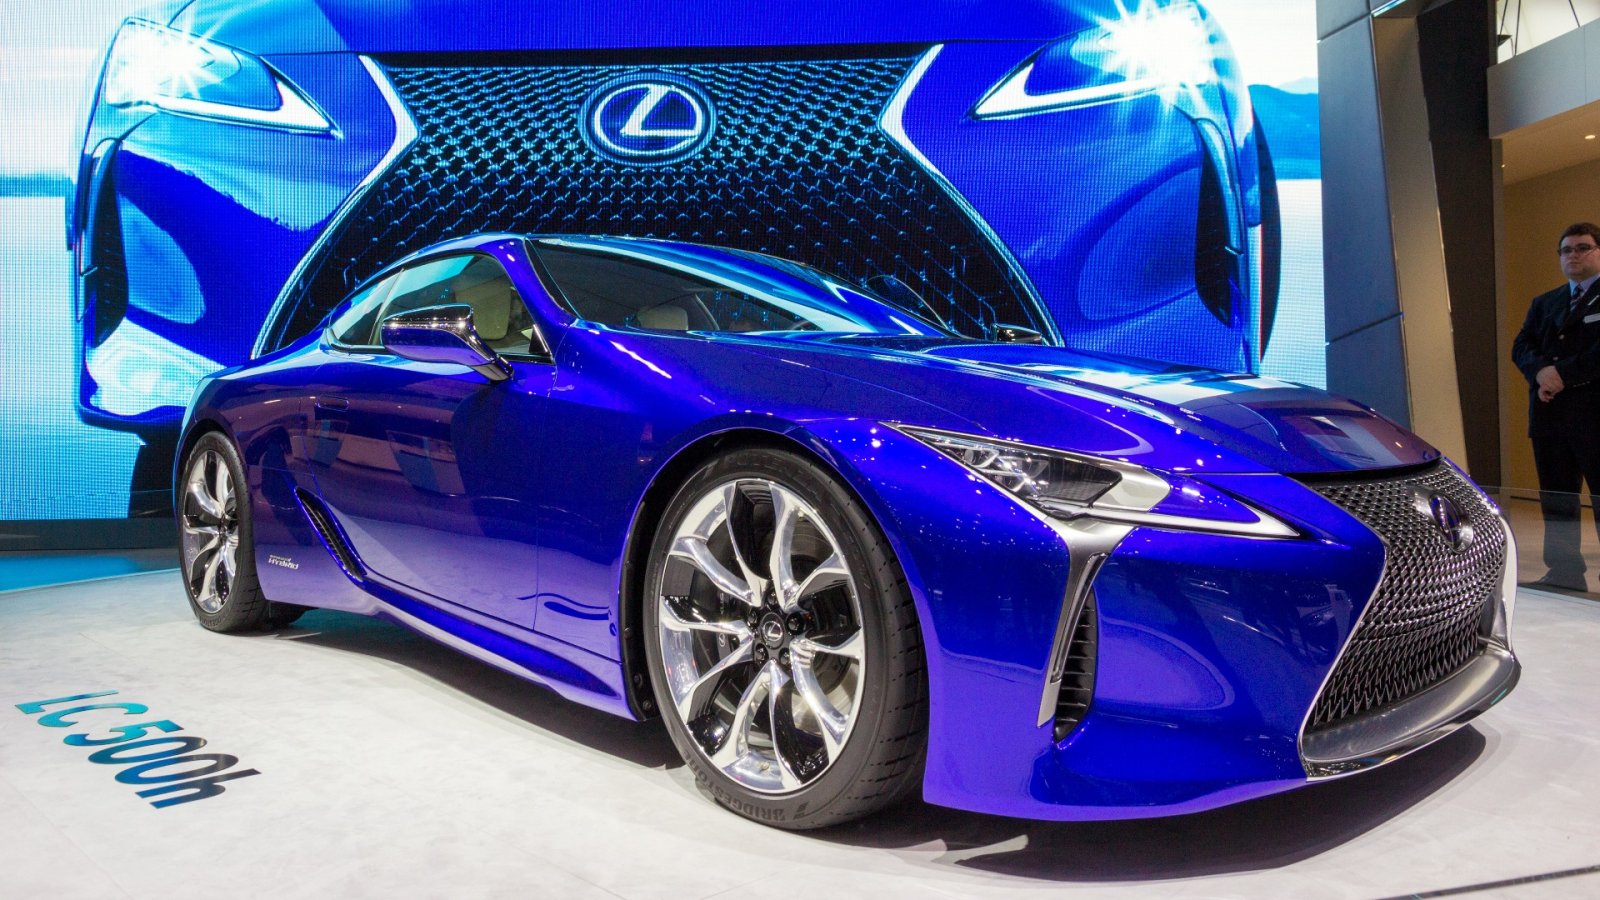 Start your engines: the new Lexus IS 500 F SPORT Performance